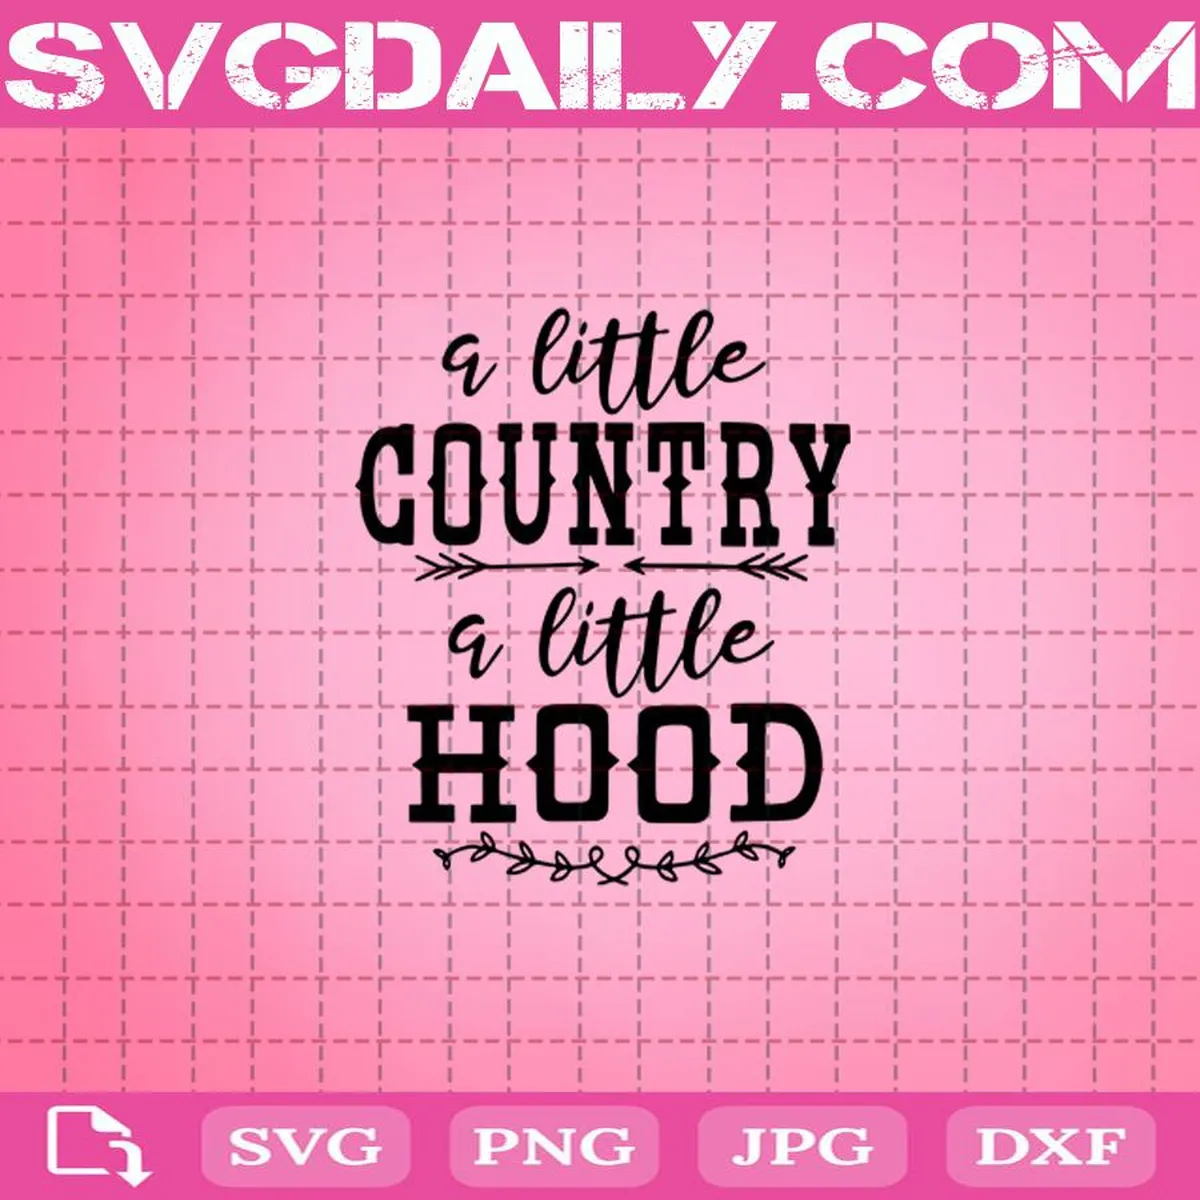 A Little Country A Little Hood Svg, Country Svg, Hood Svg, Svg Dxf Png Eps Cutting Cut File Silhouette Cricut